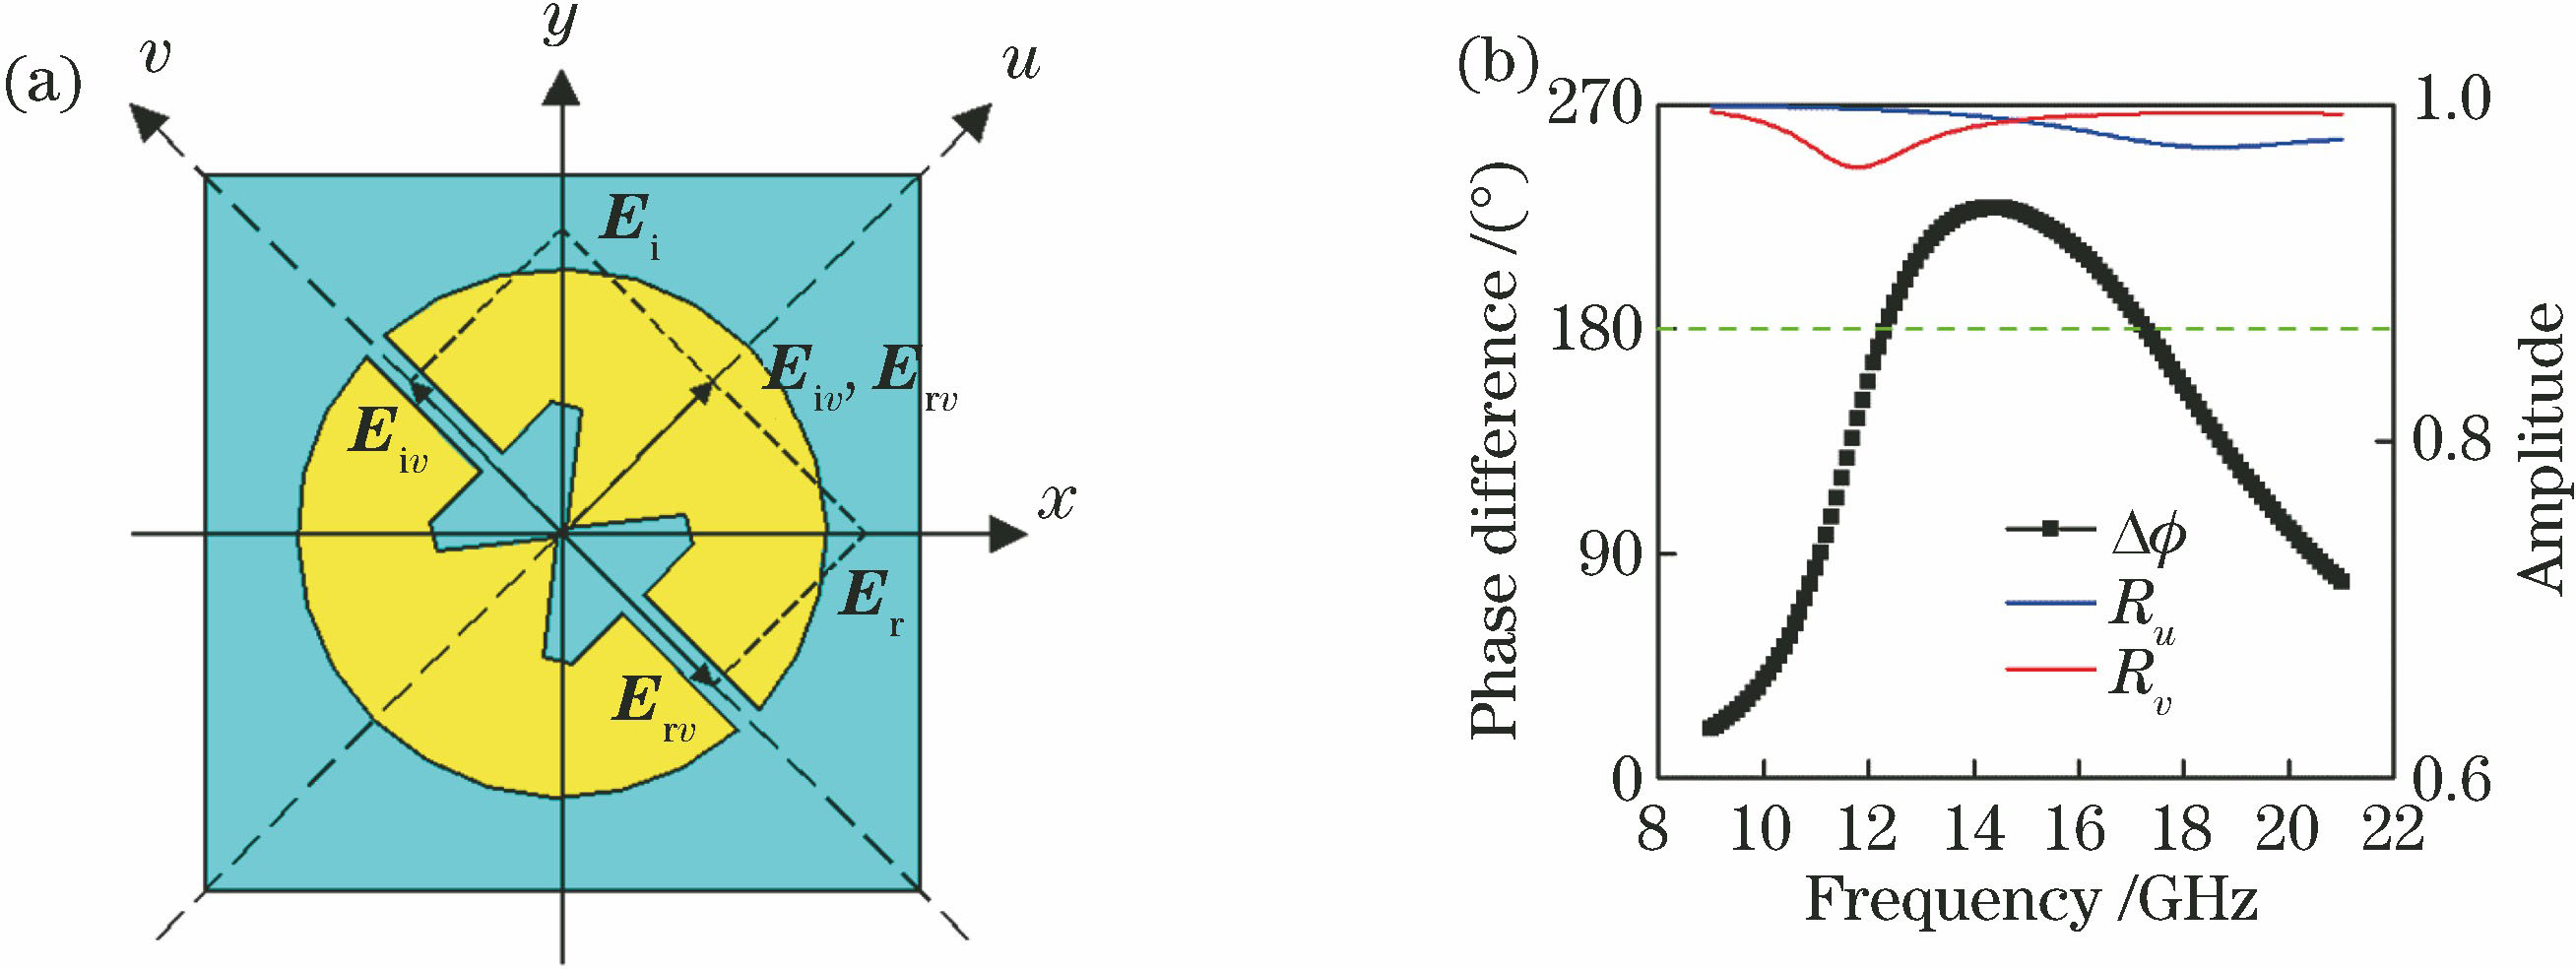 Reflection principle of metasurface. (a) Schematic of electromagnetic wave components along v and u; (b) reflection amplitudes and phase differences of Rv and Ru